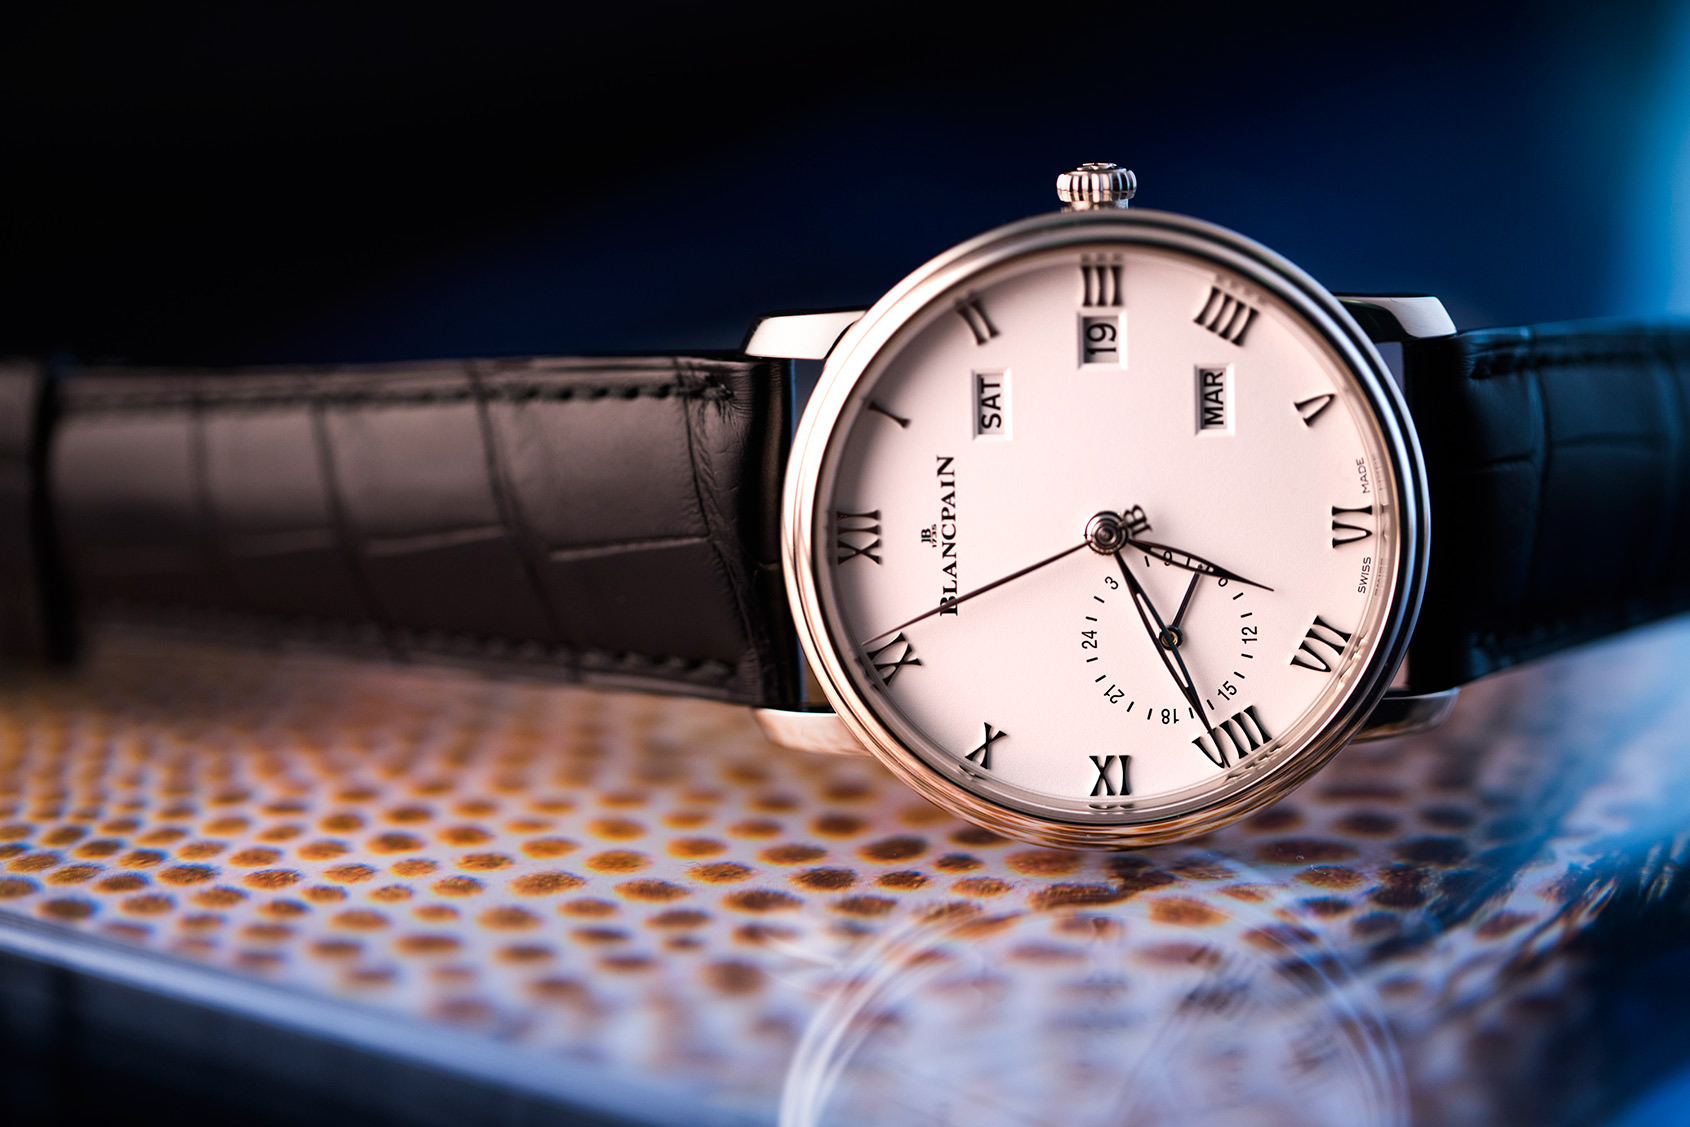 Blancpain Villeret Annual Calendar with GMT Handson Review